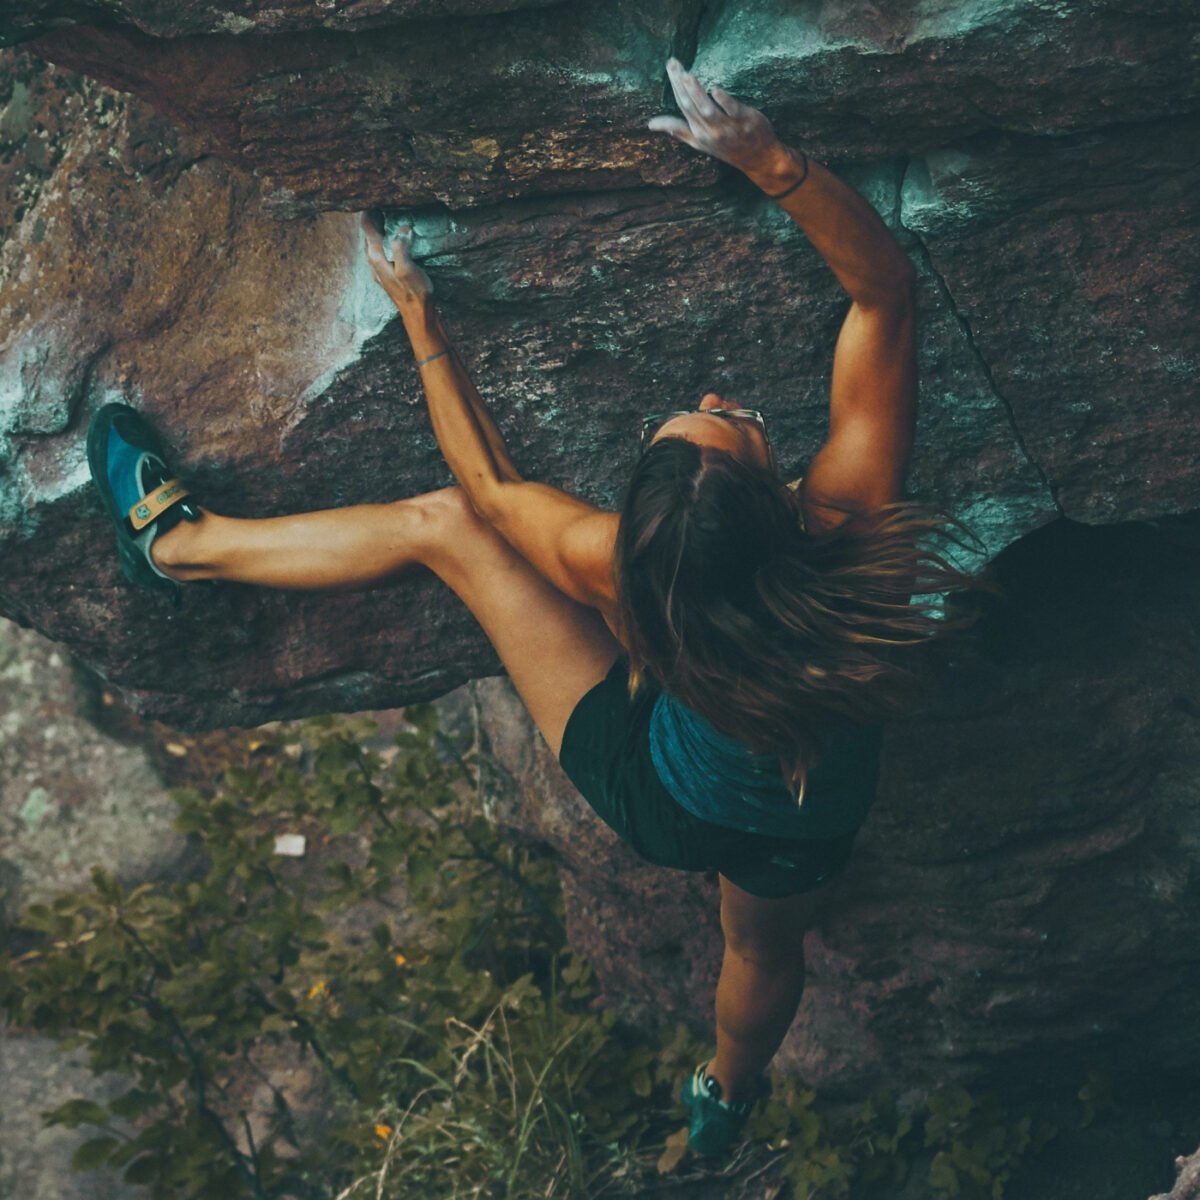 A person confidently free climbing a steep wall.